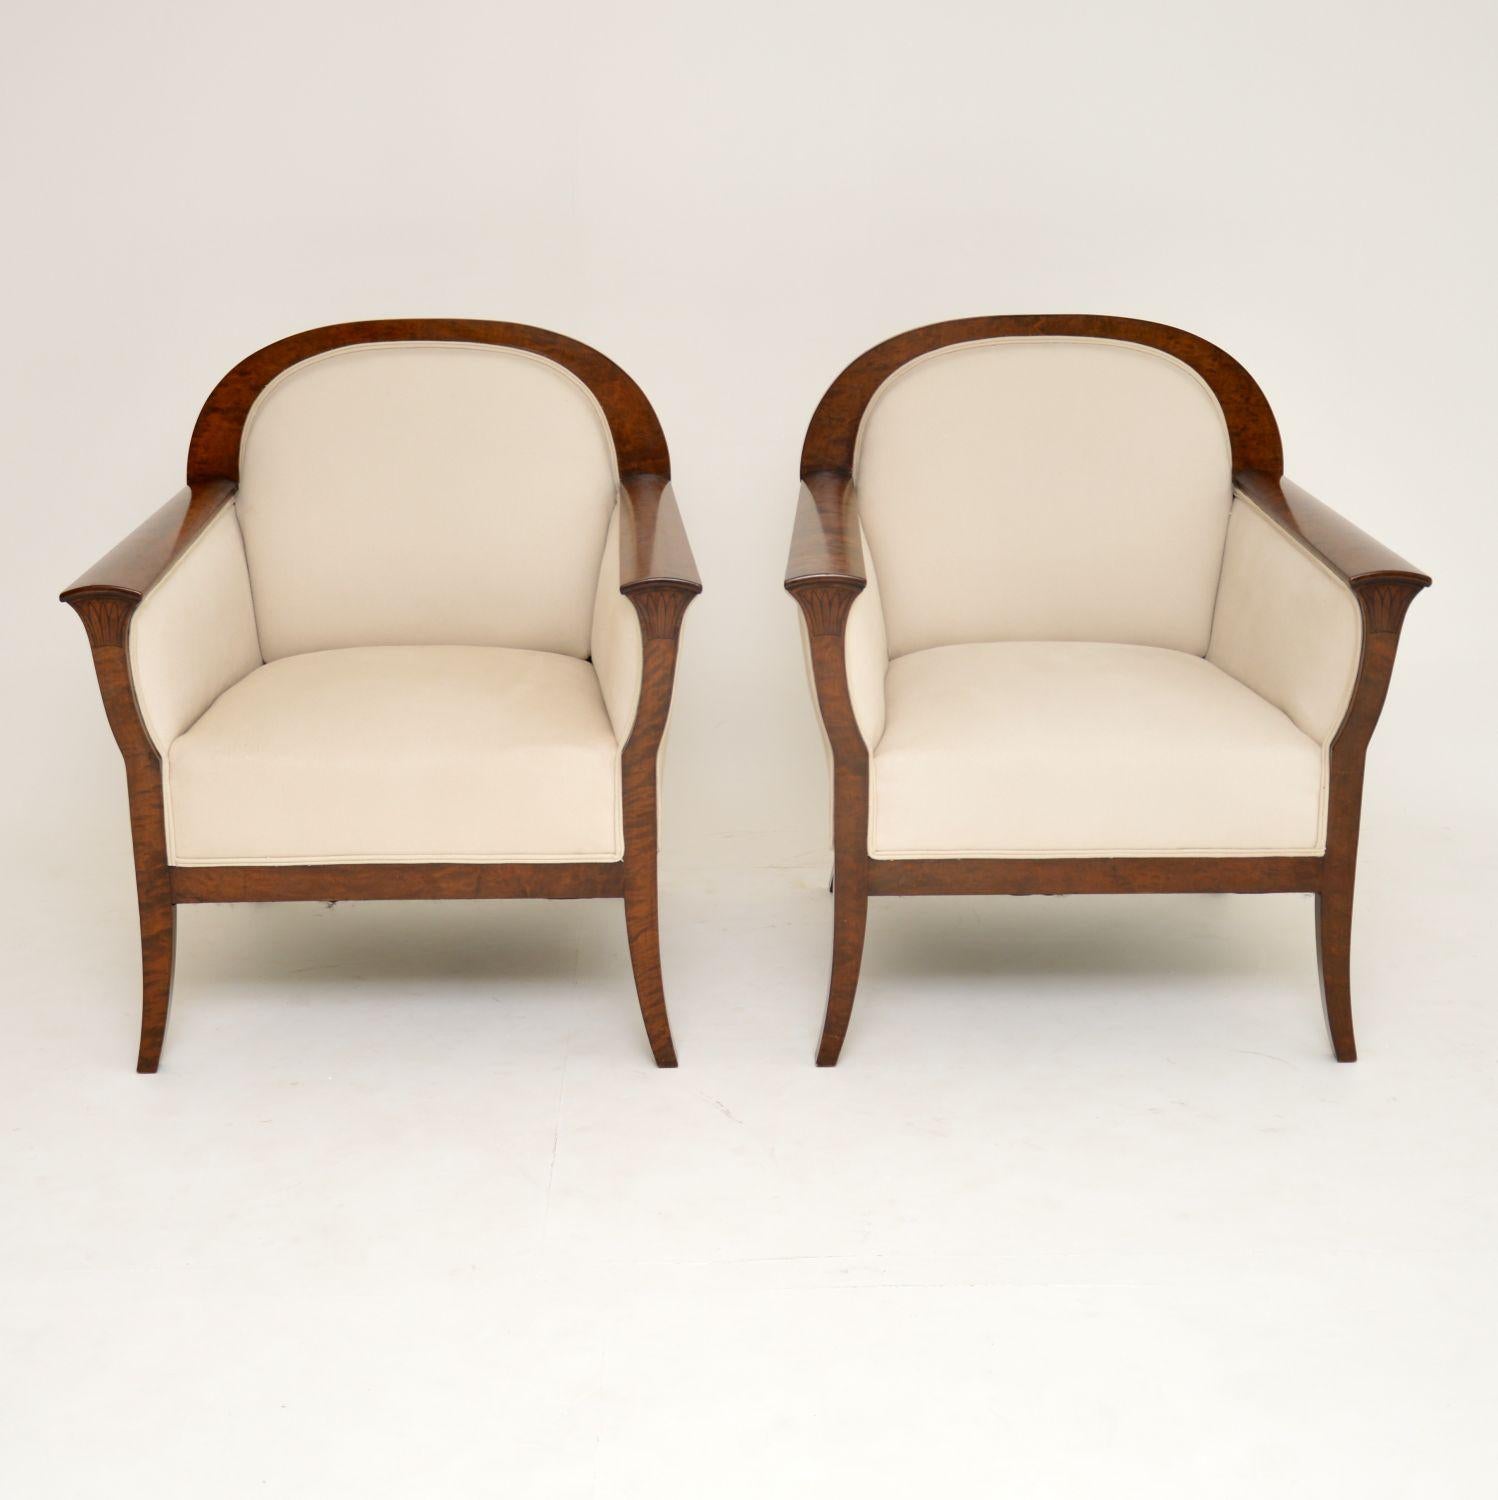 Very stylish pair of antique Biedermeier style Swedish upholstered armchairs with satin birch show wood frames. These armchairs which have just come over from Sweden, have been re-polished & re-upholstered in our regular cream natural cotton linen